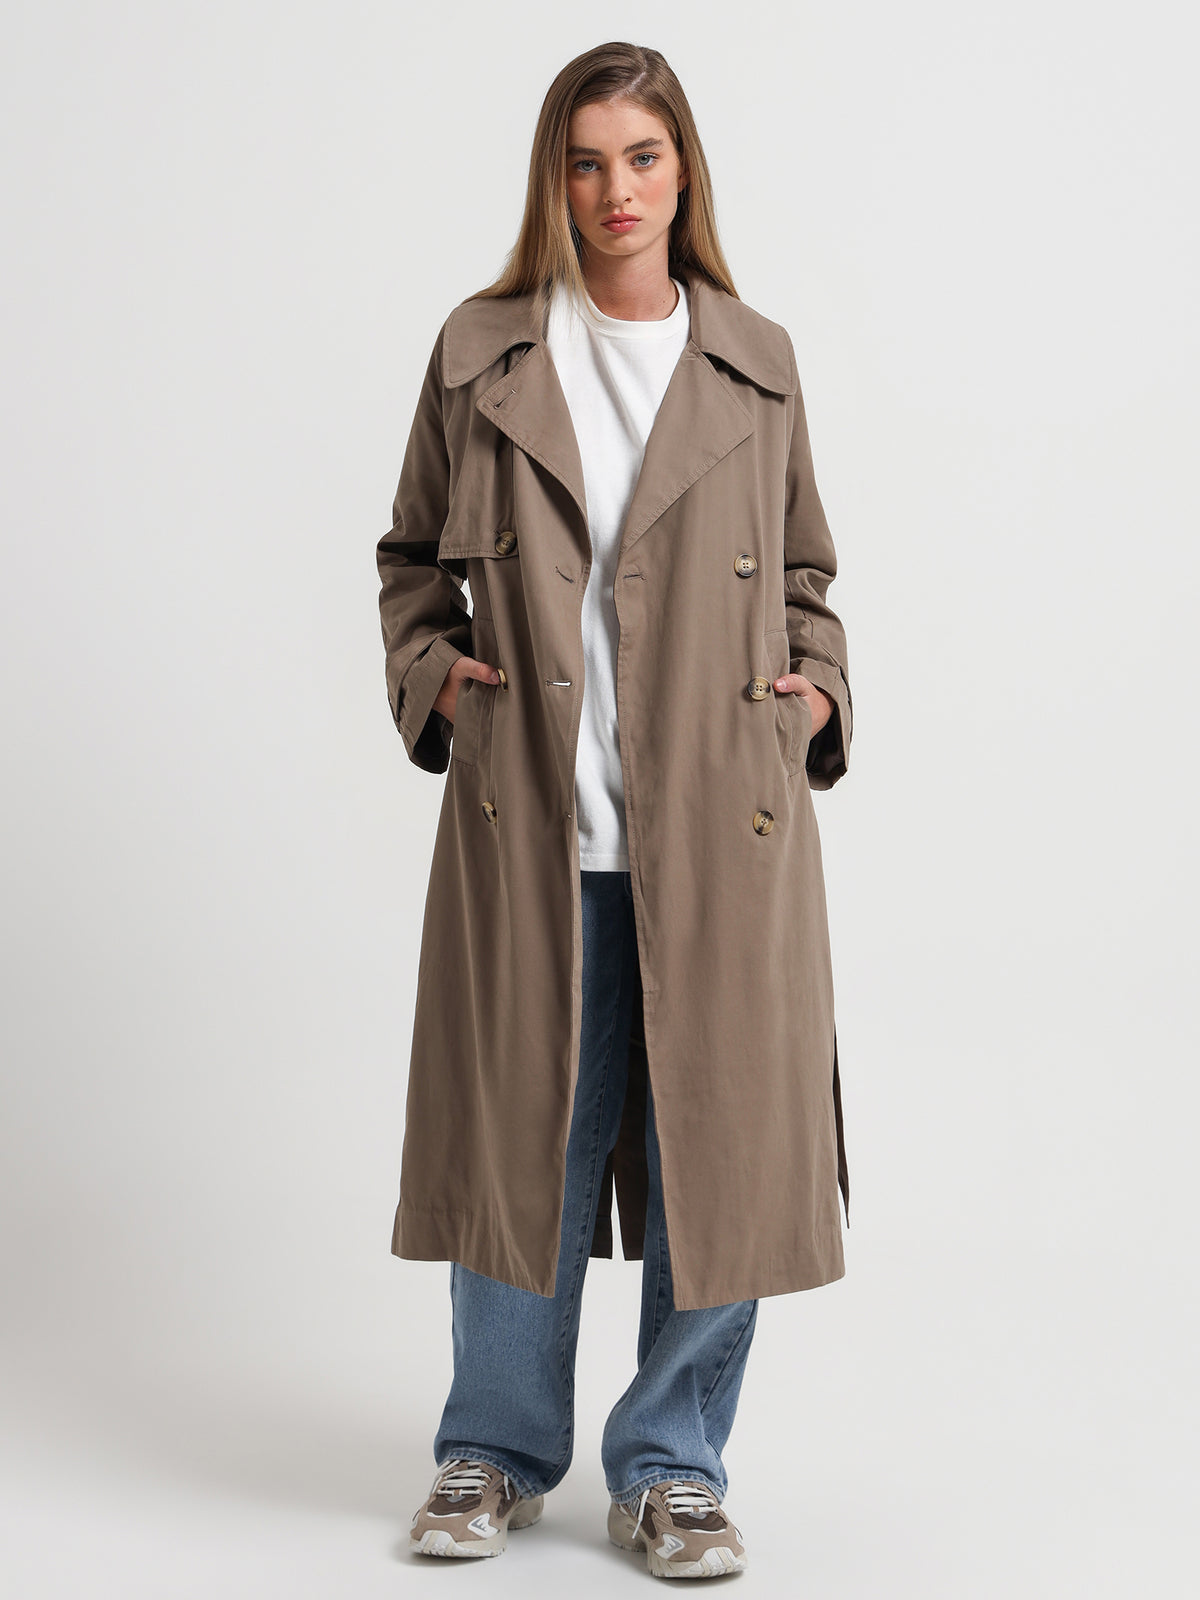 Odyssey Trench Coat in Smoke Brown